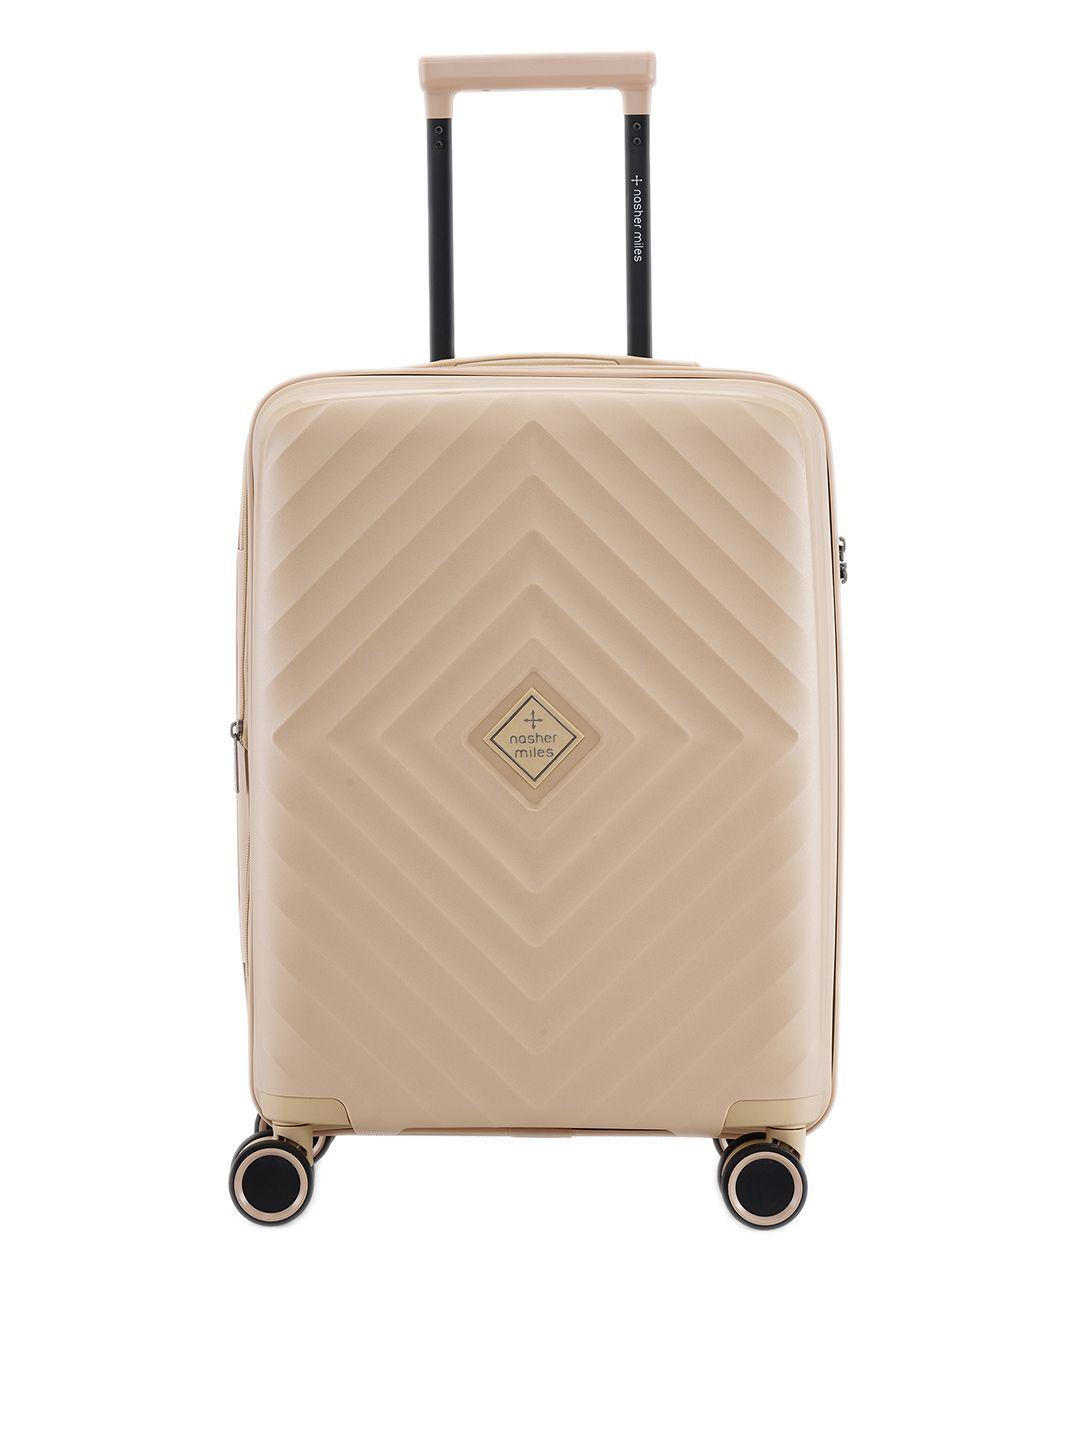 nasher miles textured hard-sided cabin trolley suitcase